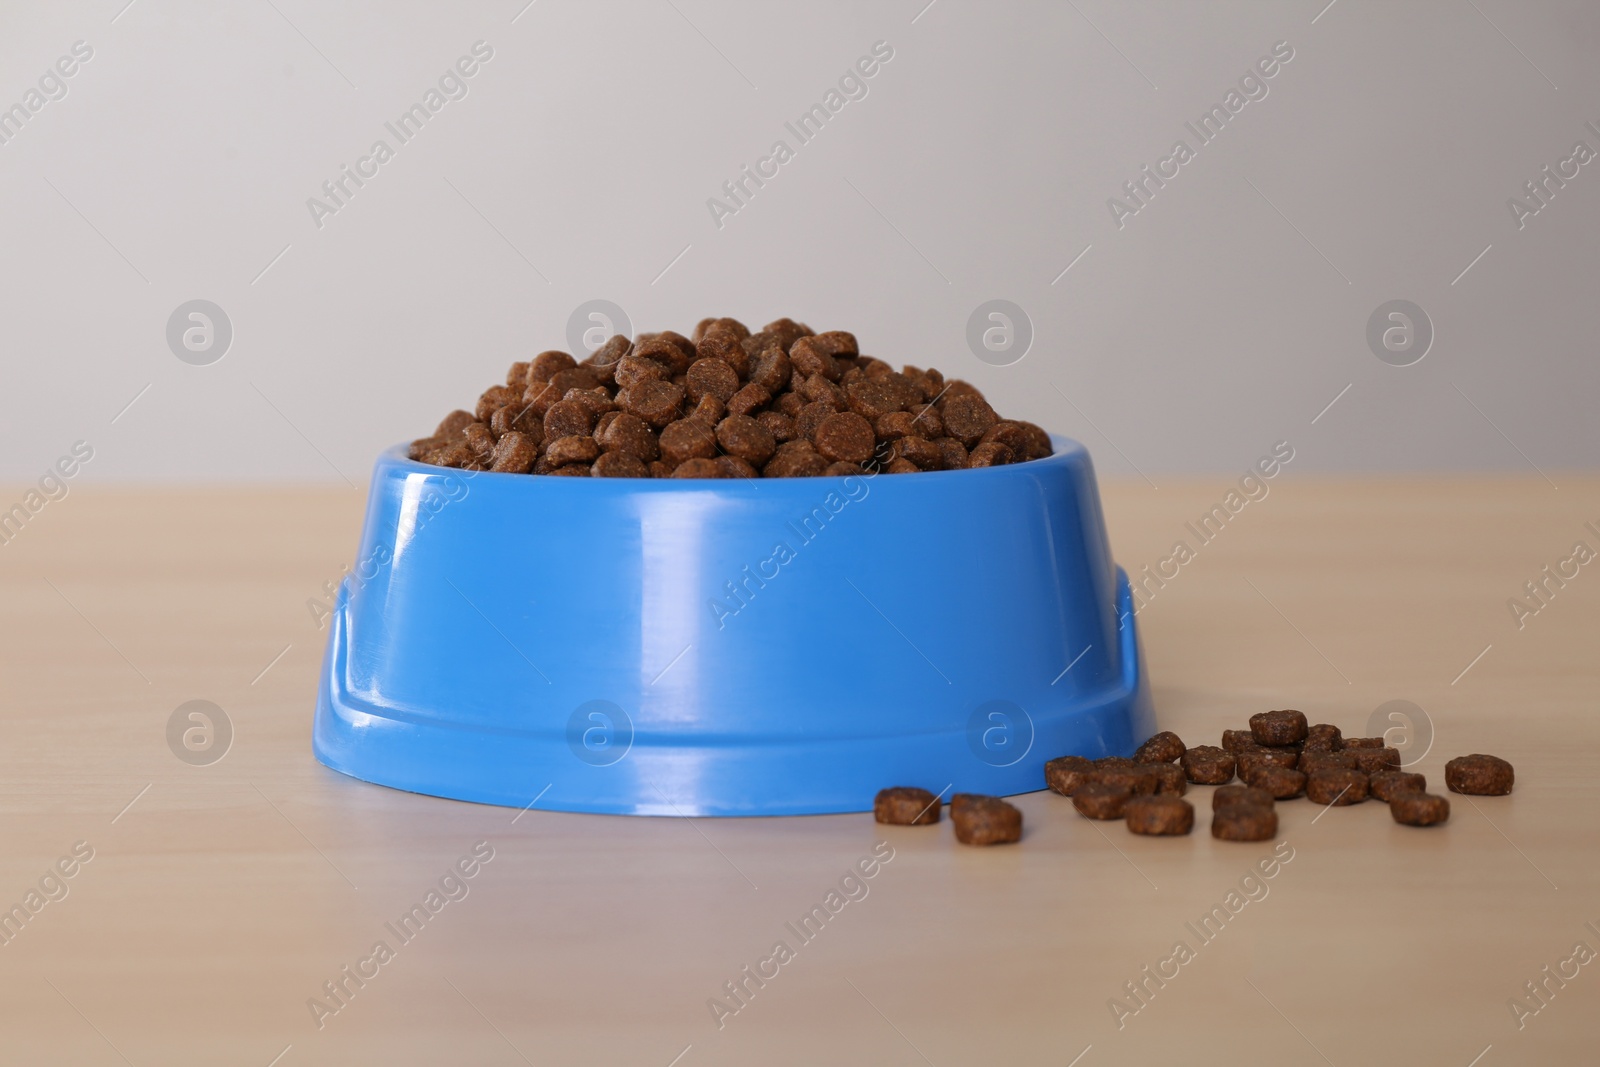 Photo of Dry food in light blue pet bowl on wooden surface